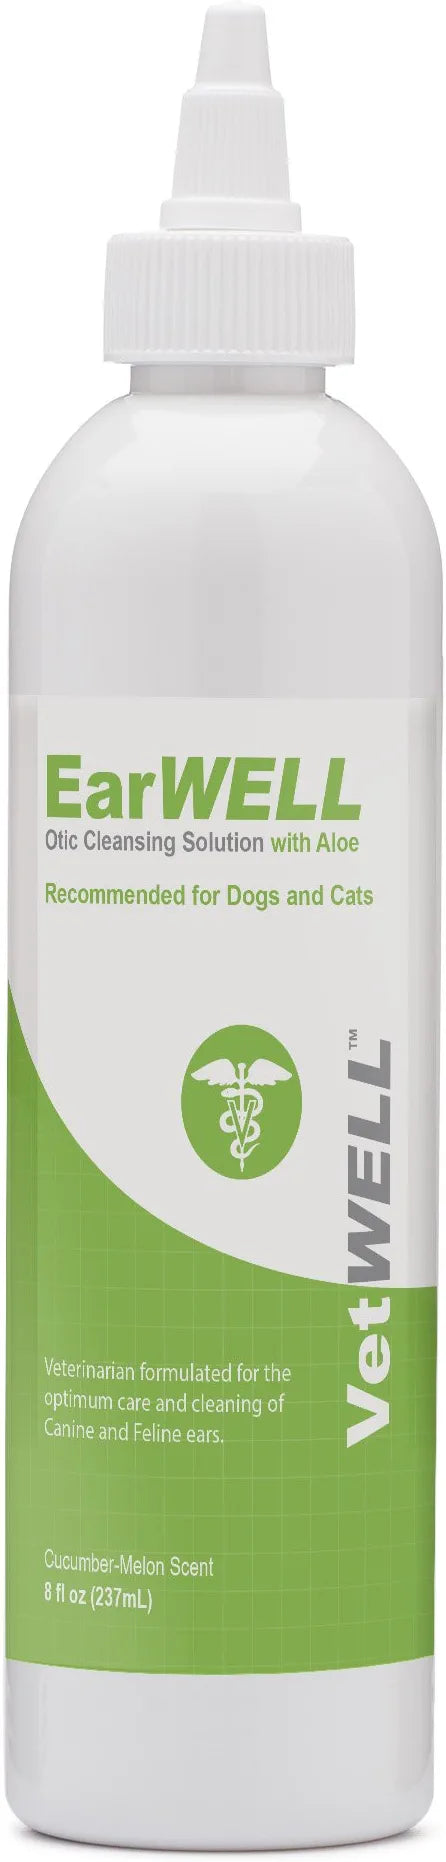 VetWELL Ear Cleaner for Dogs and Cats - Otic Rinse for Infections and Controlling Ear Infections and Odor in Pets - 8 oz (Cucumber Melon)